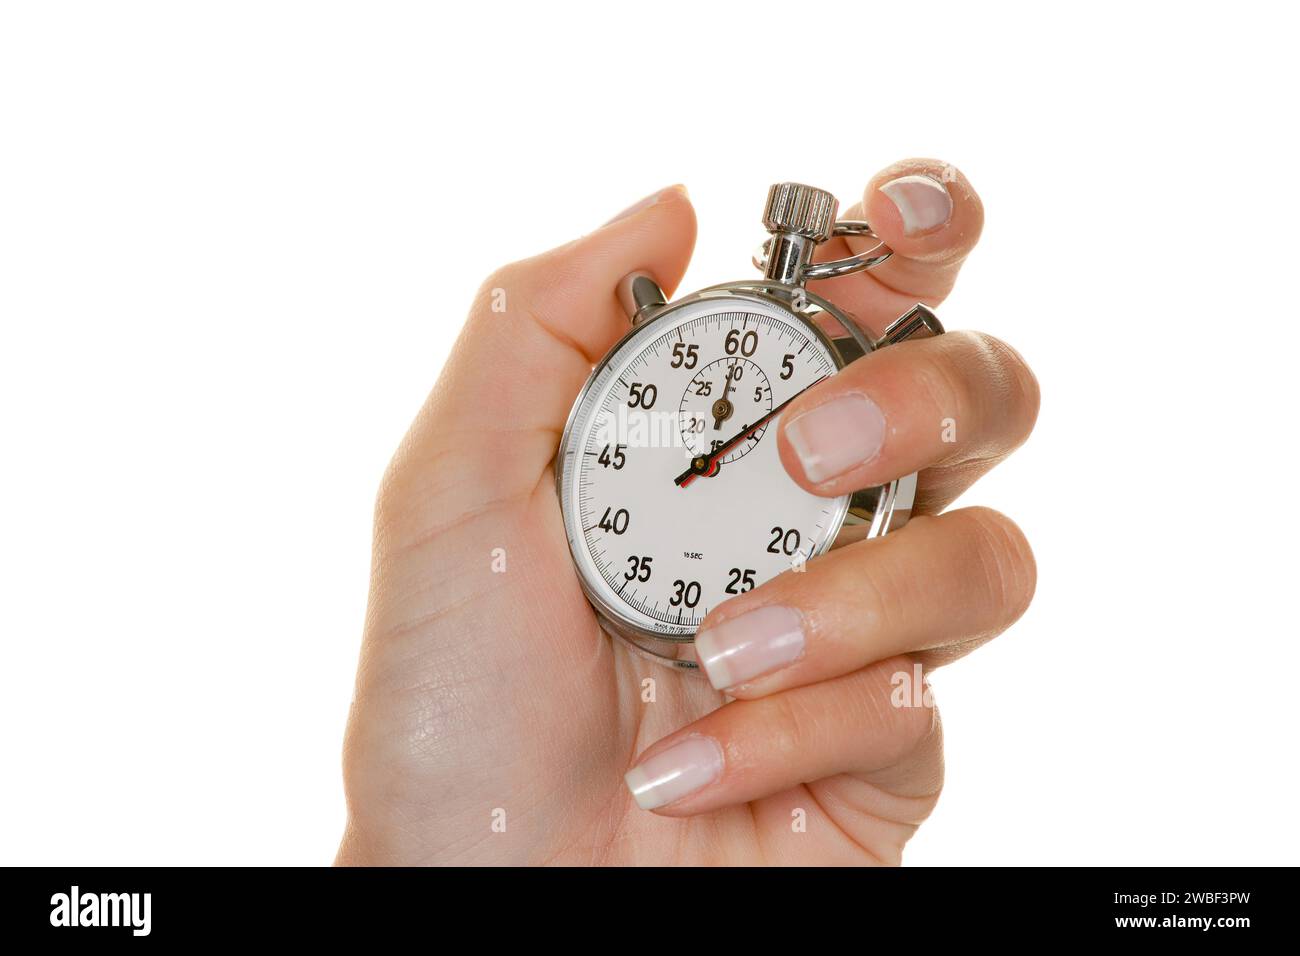 A hand with a stopwatch, woman's hand, cutout Stock Photo